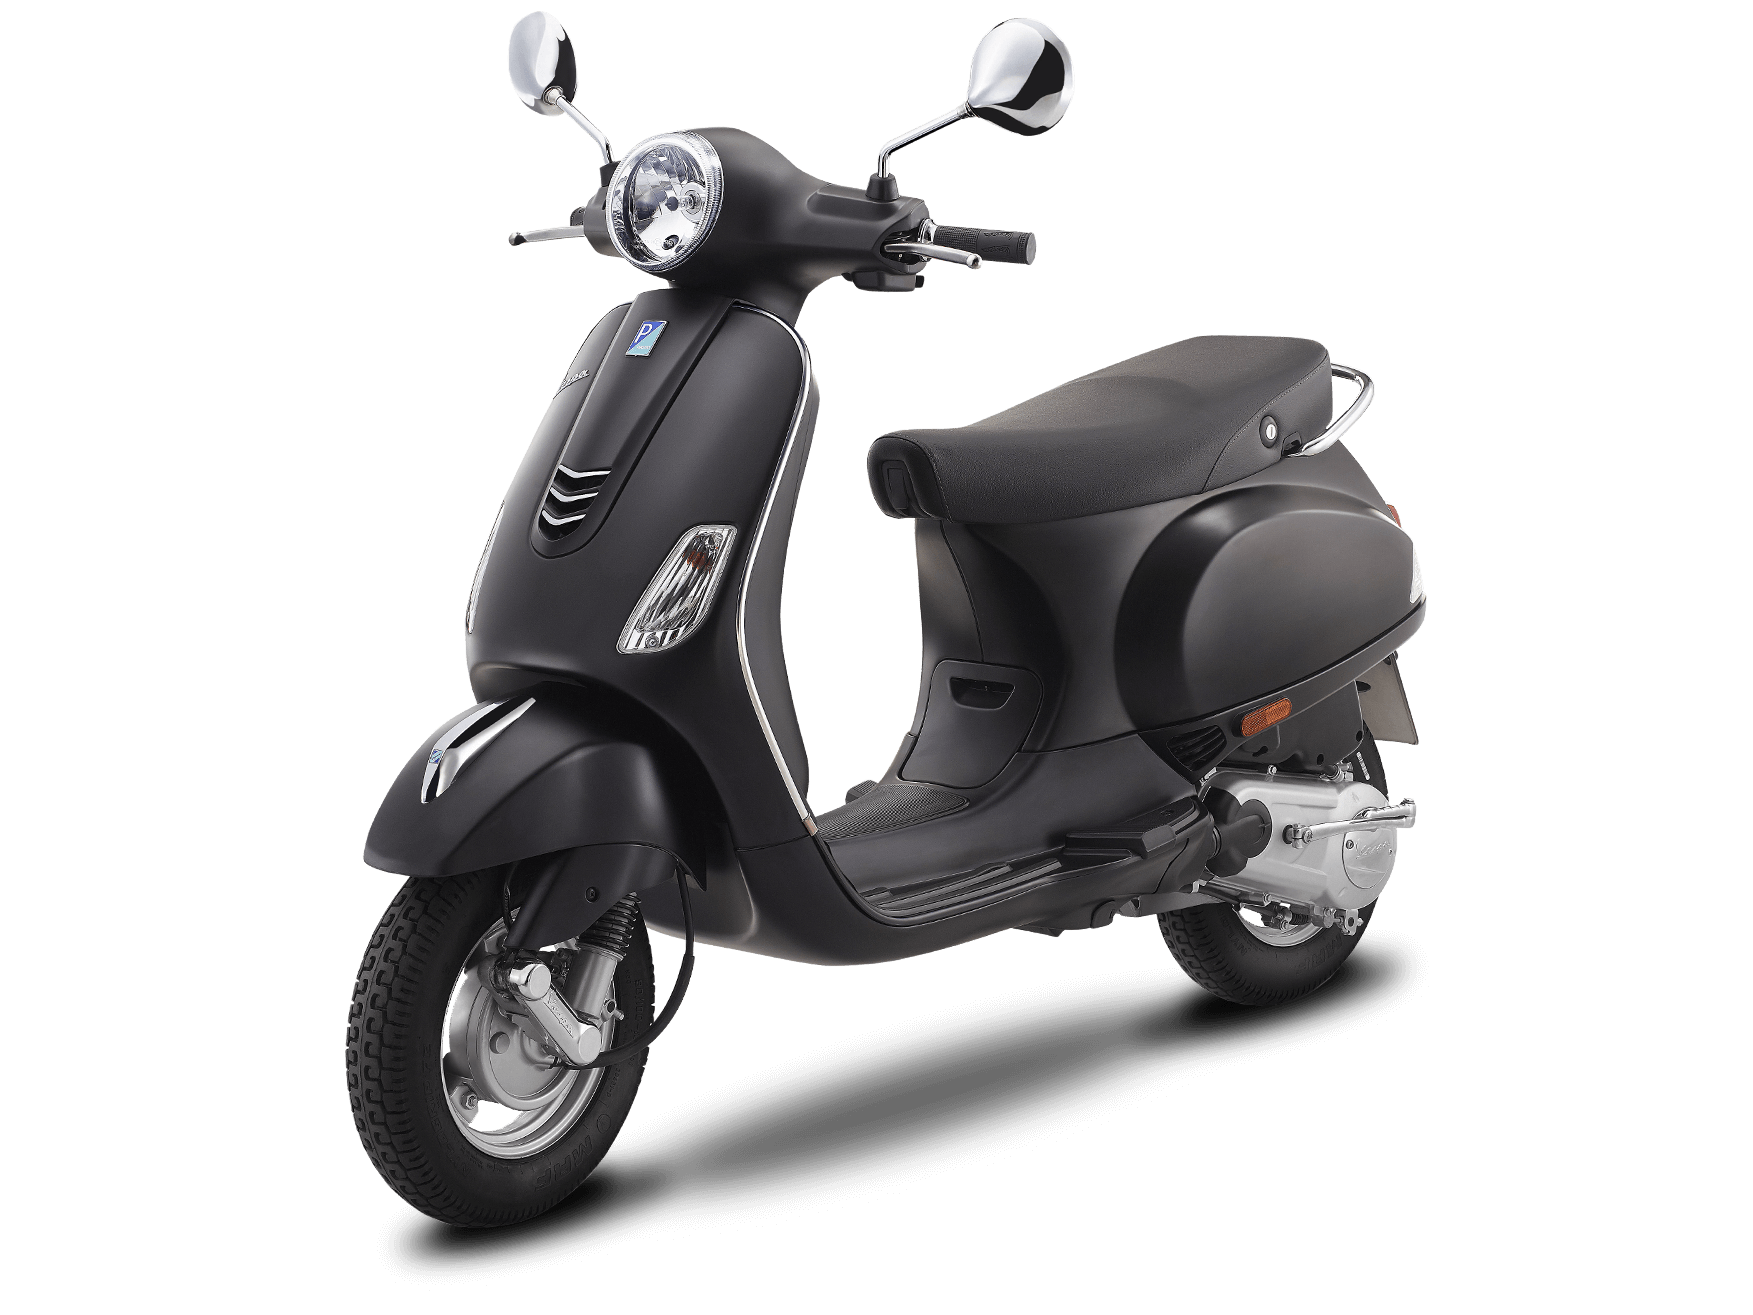 Vespa LX Bike Review, Specification, Mileage and Price